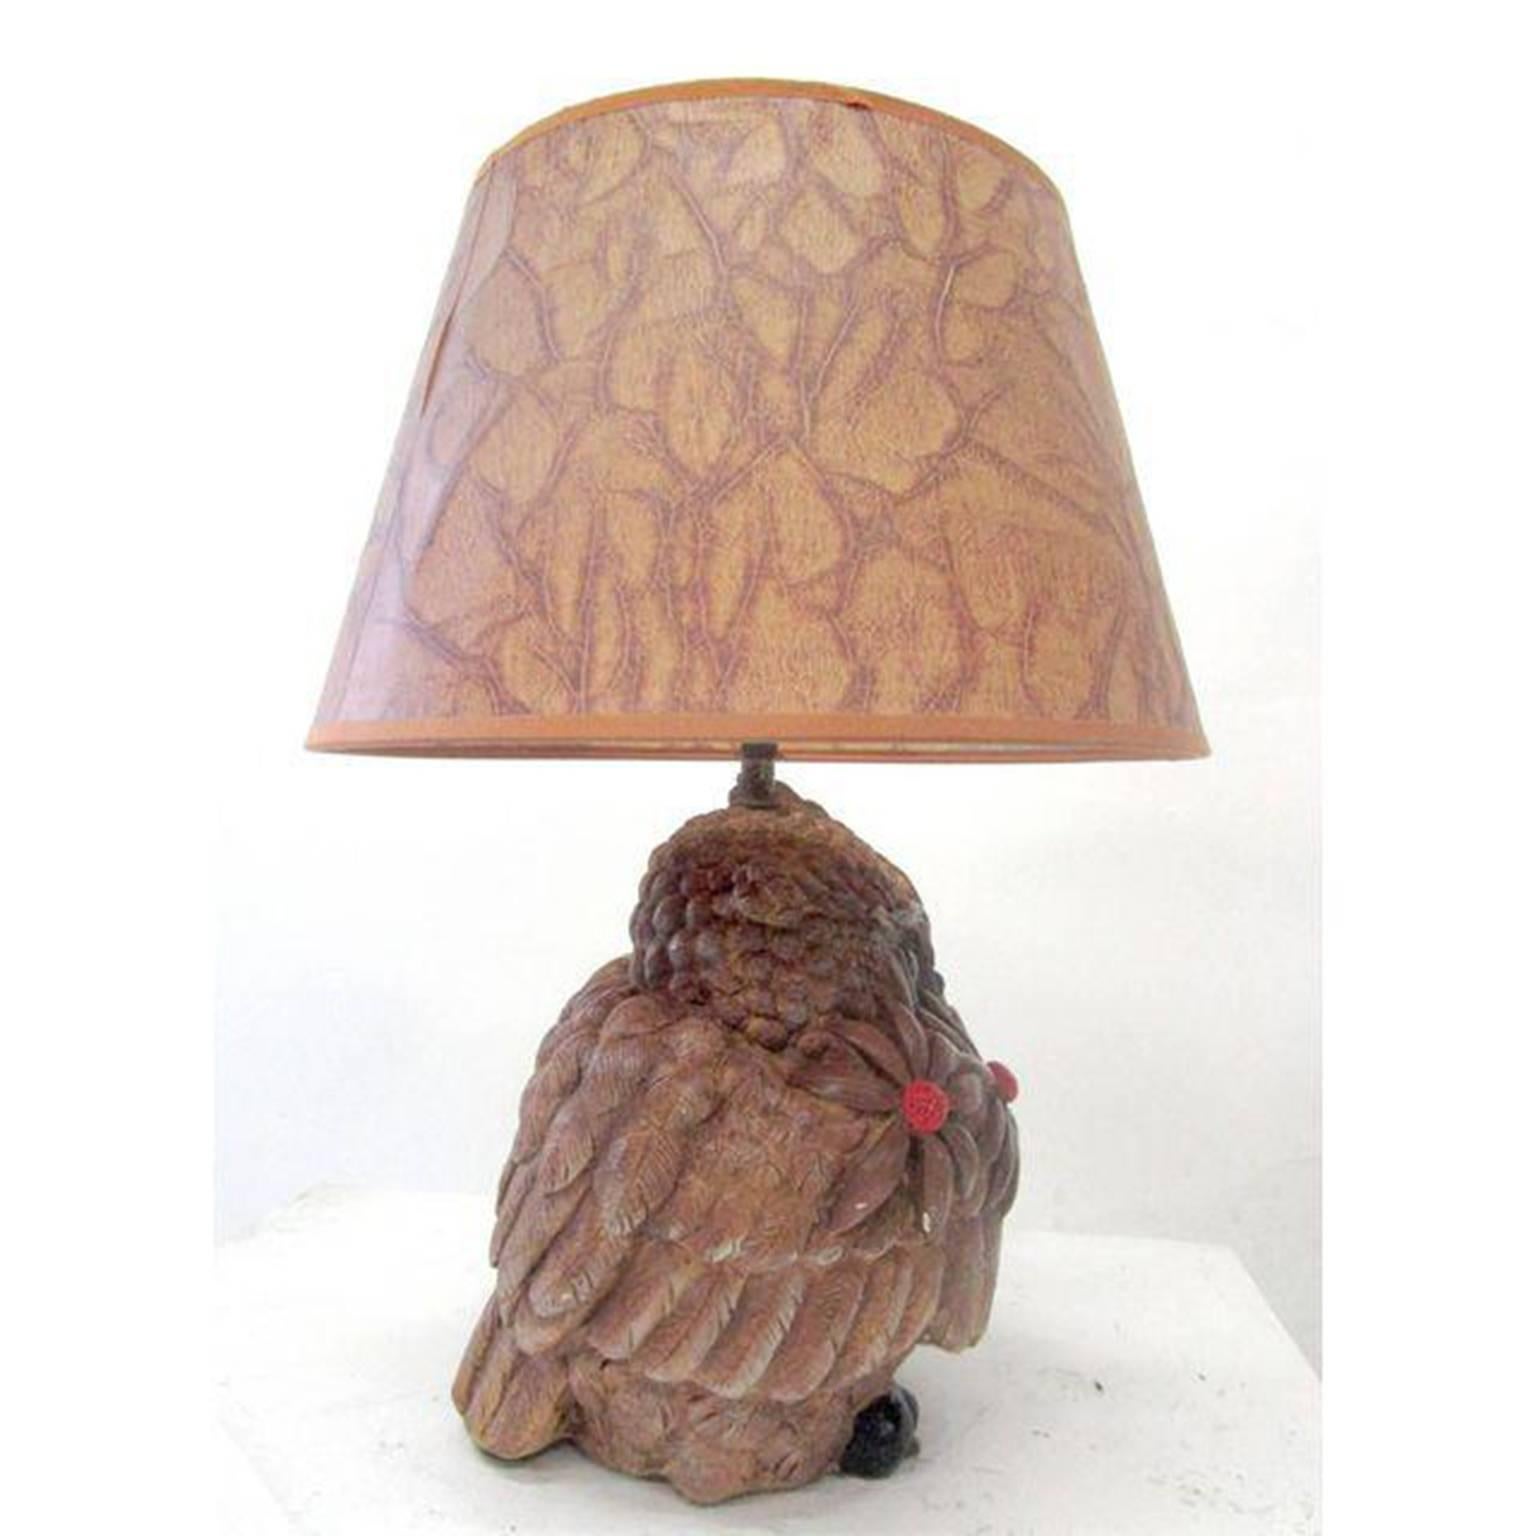 The base of this Mid-Century owl lamp is composed of a single block of wood that has been hand-carved with incredible detail in the feathers and face. The lamp, wired and in working condition, is topped off by a brown flared shade with a unique